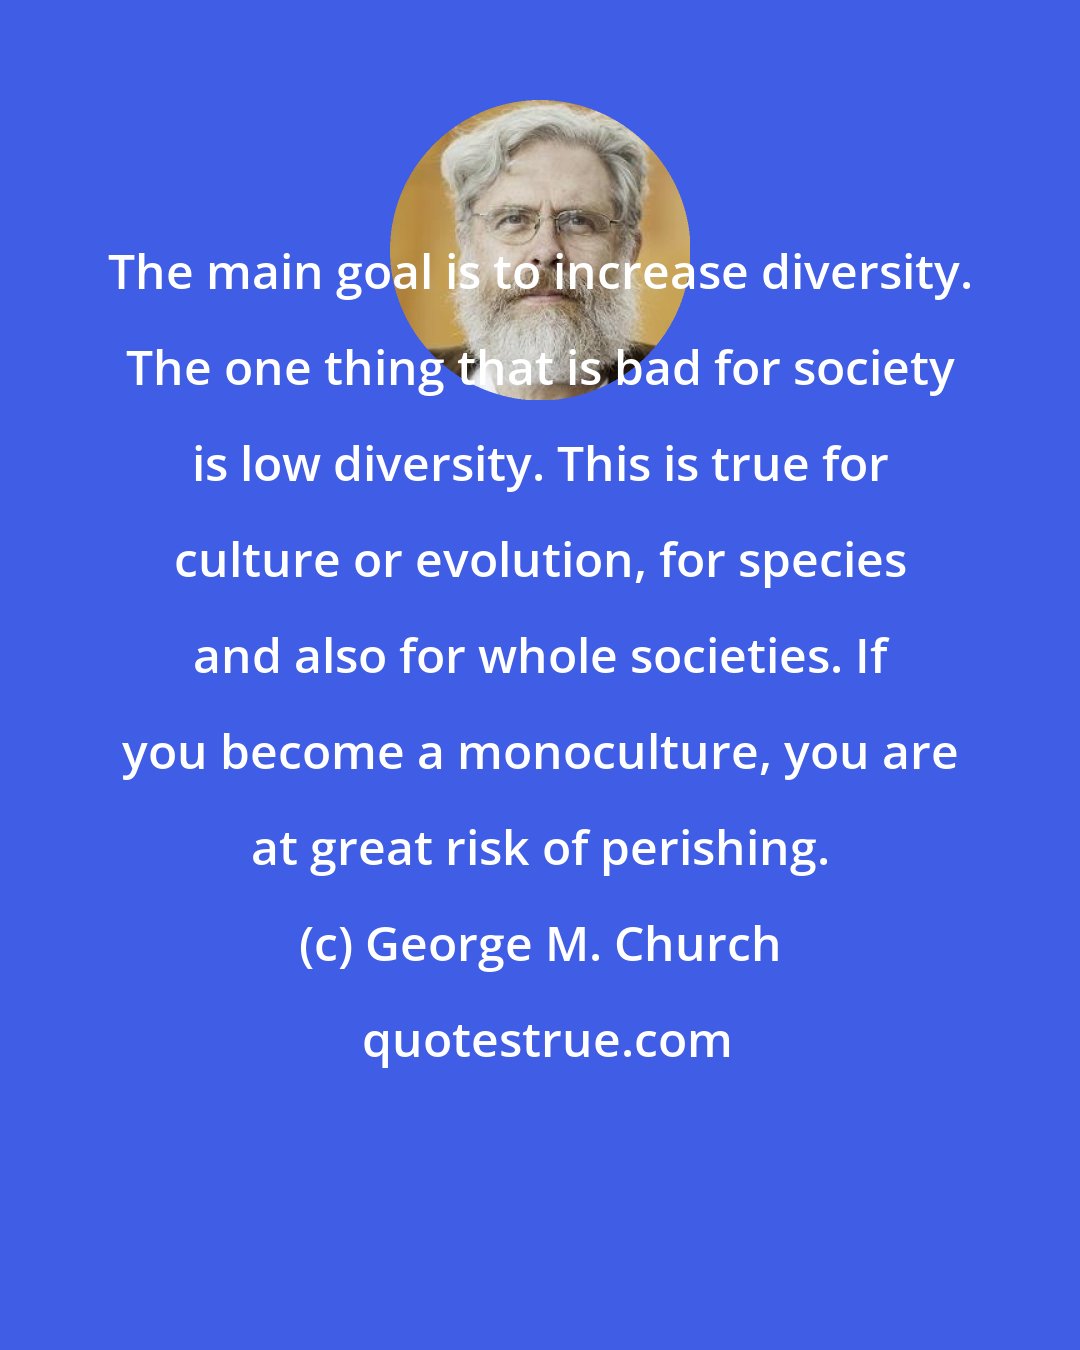 George M. Church: The main goal is to increase diversity. The one thing that is bad for society is low diversity. This is true for culture or evolution, for species and also for whole societies. If you become a monoculture, you are at great risk of perishing.